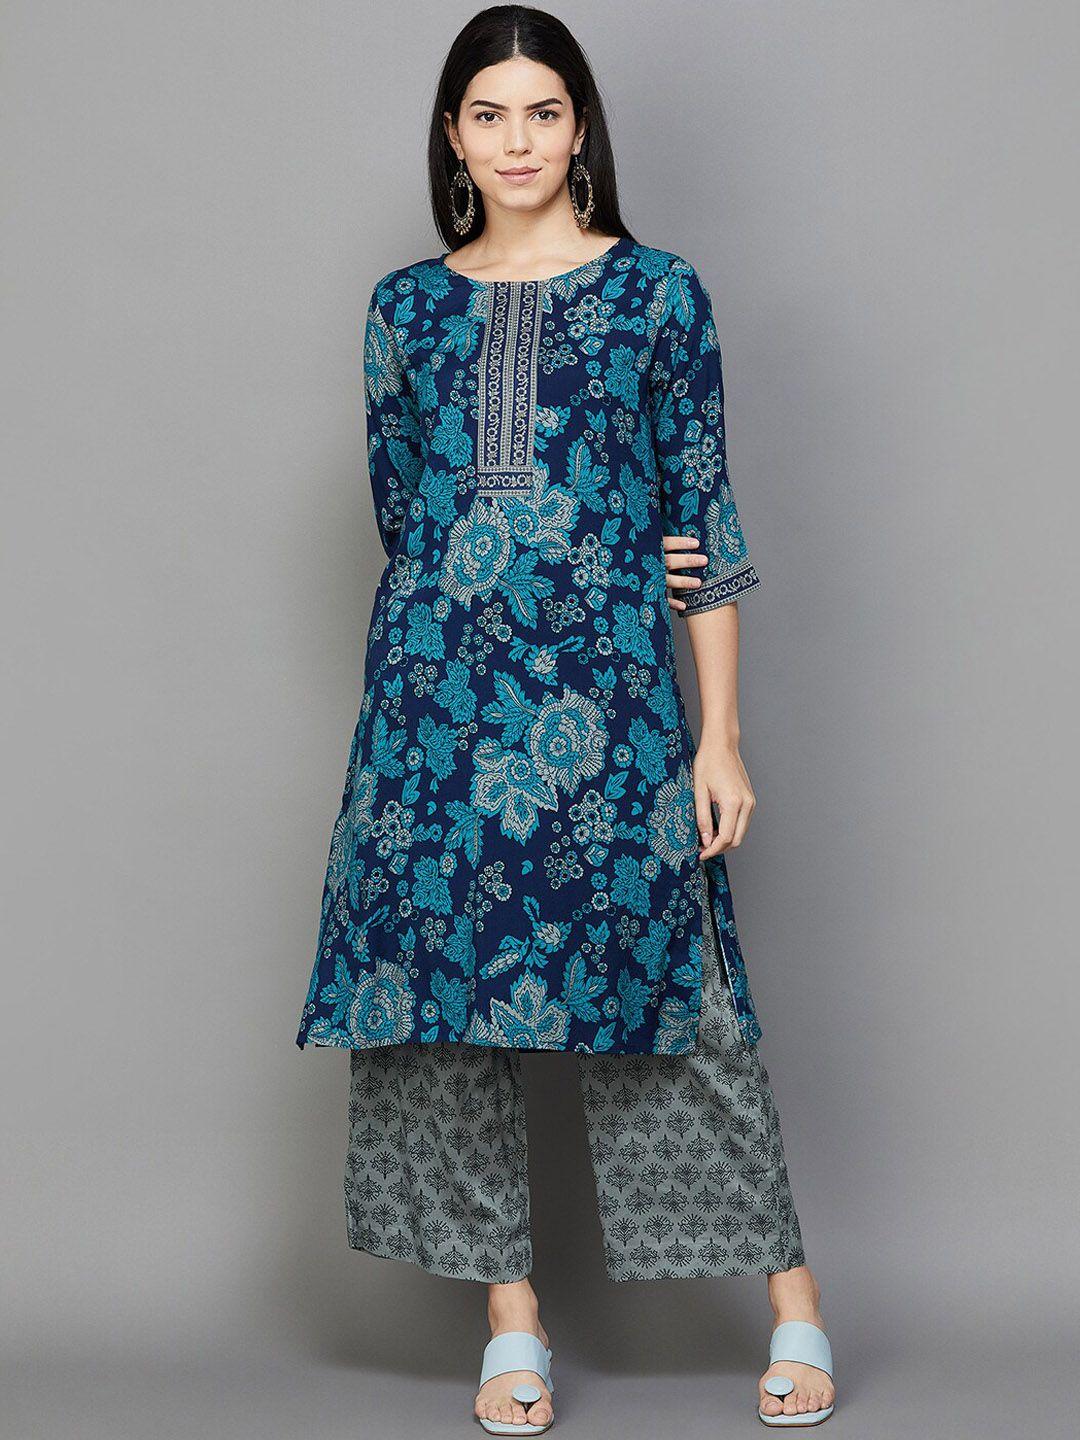 melange-by-lifestyle-floral-printed-kurta-with-palazzos